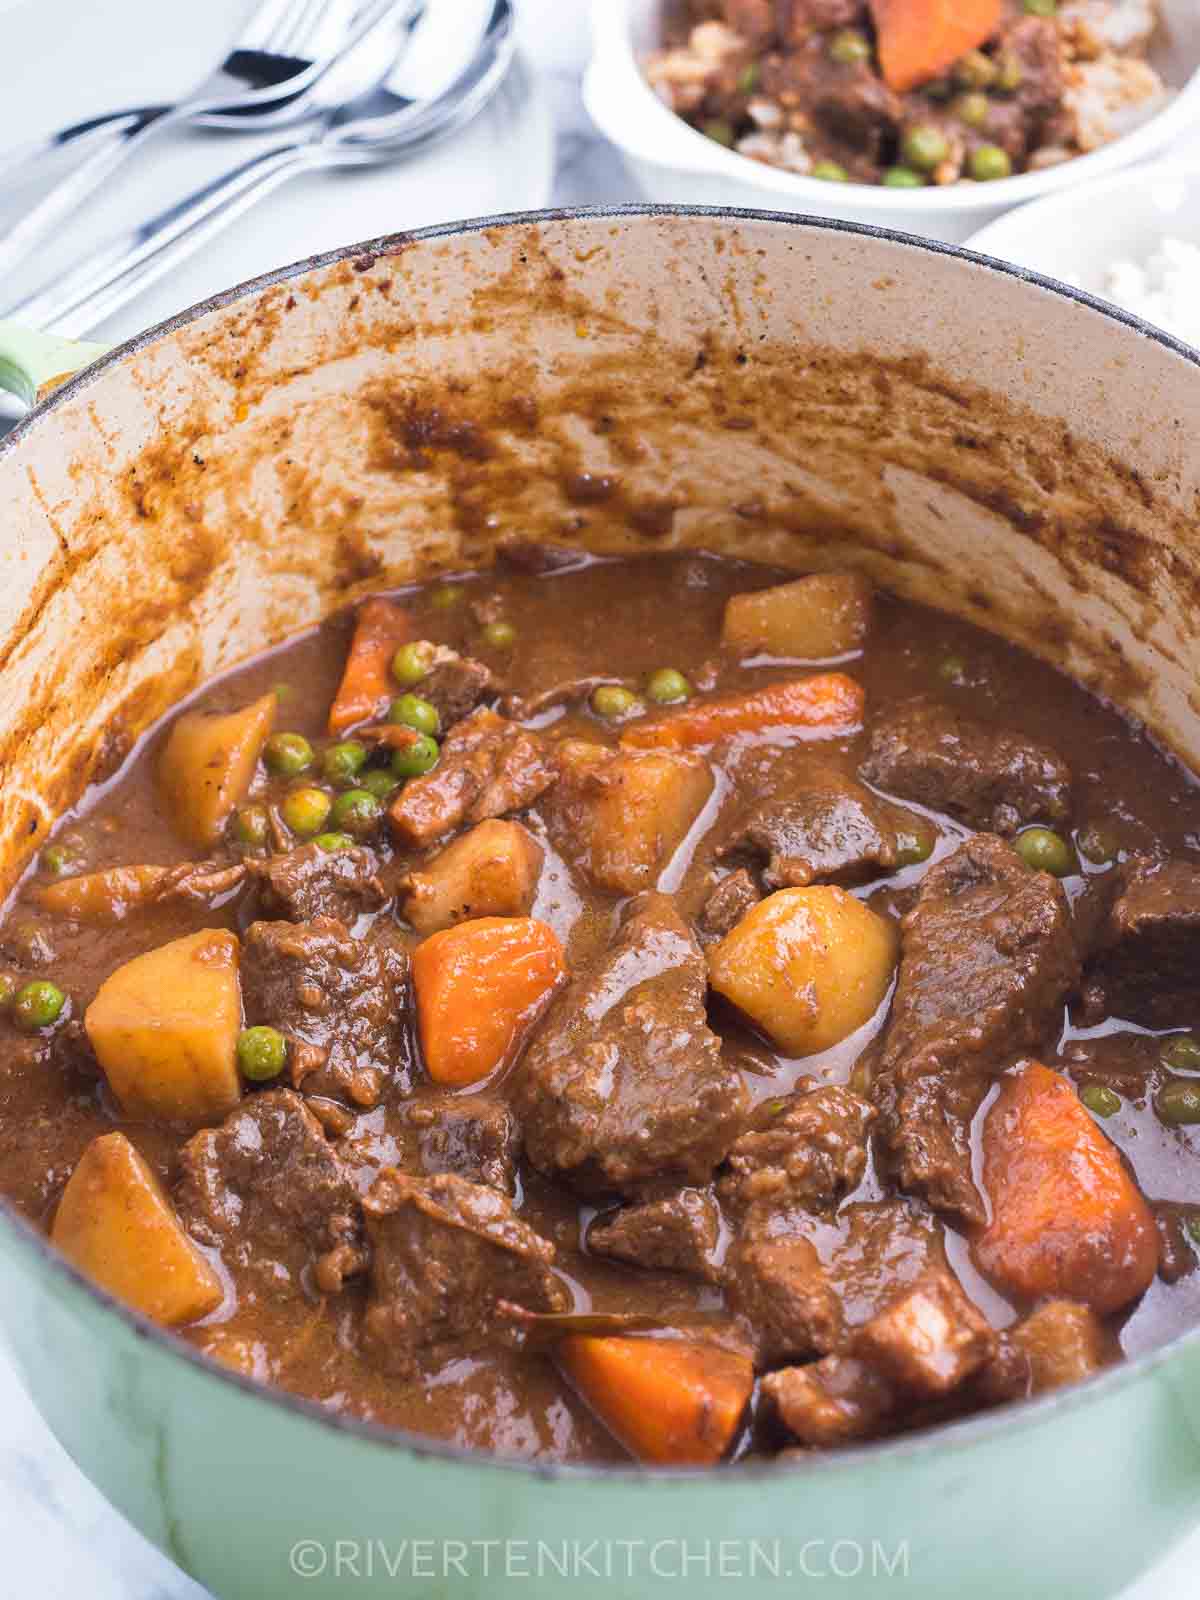 Filipino Beef Stew with Carrots and Potatoes